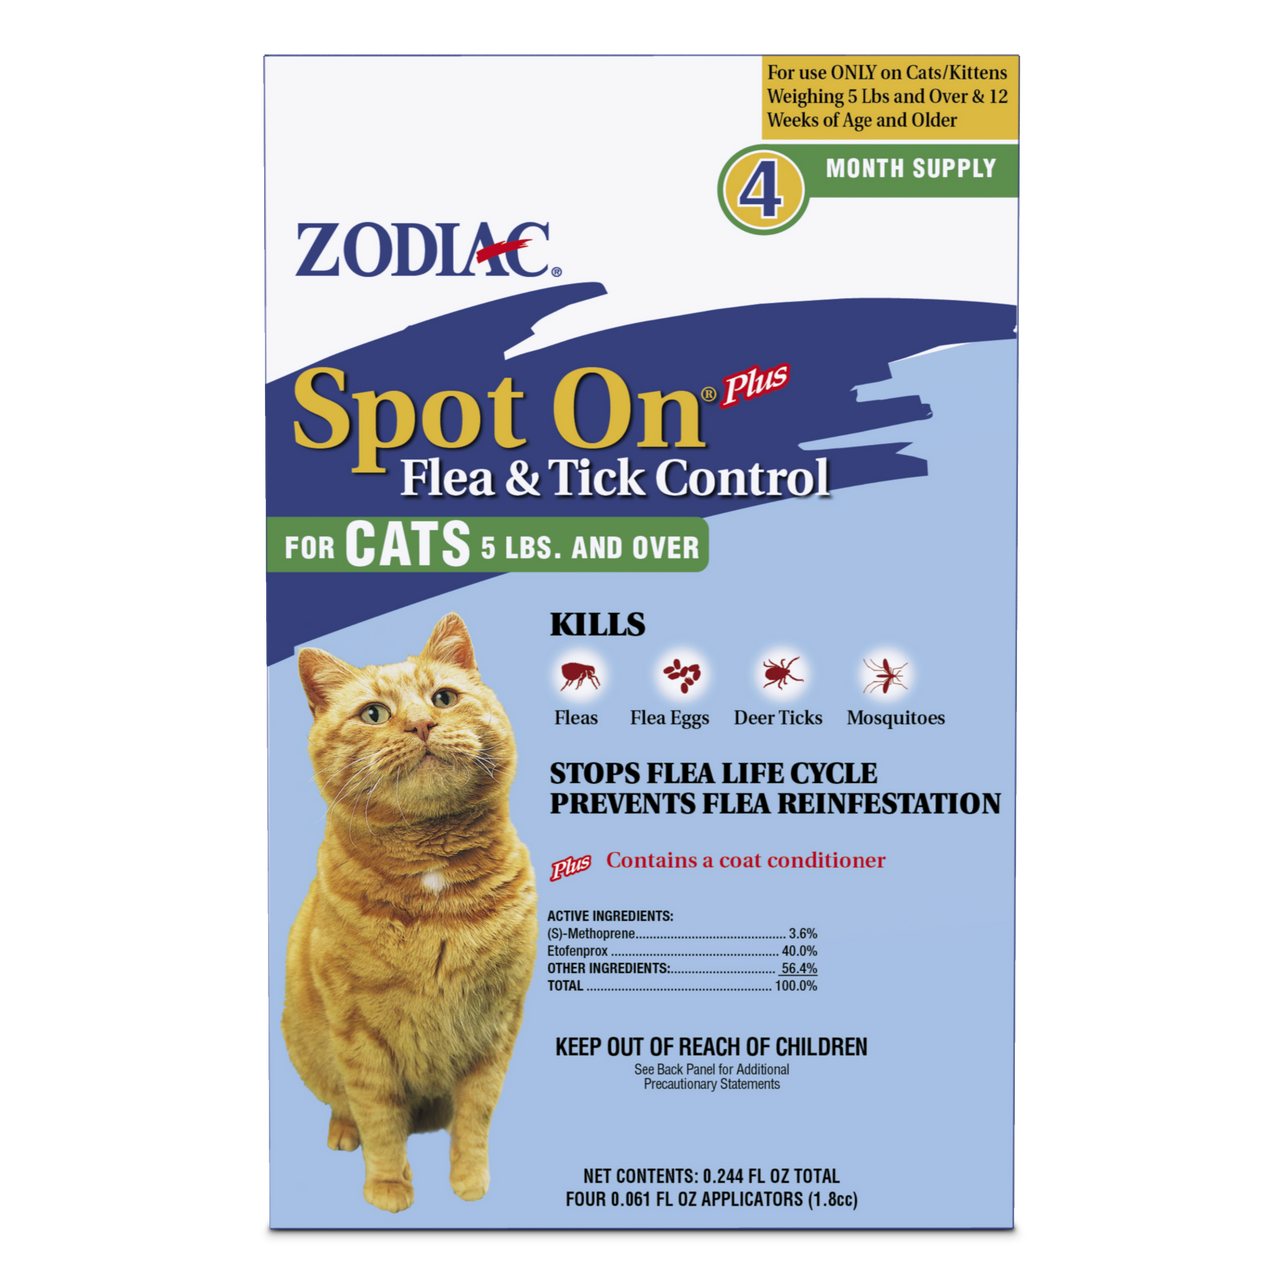 Zodiac Spot On Plus Flea & Tick Control for Cats 5 lbs and Over 4 Pack